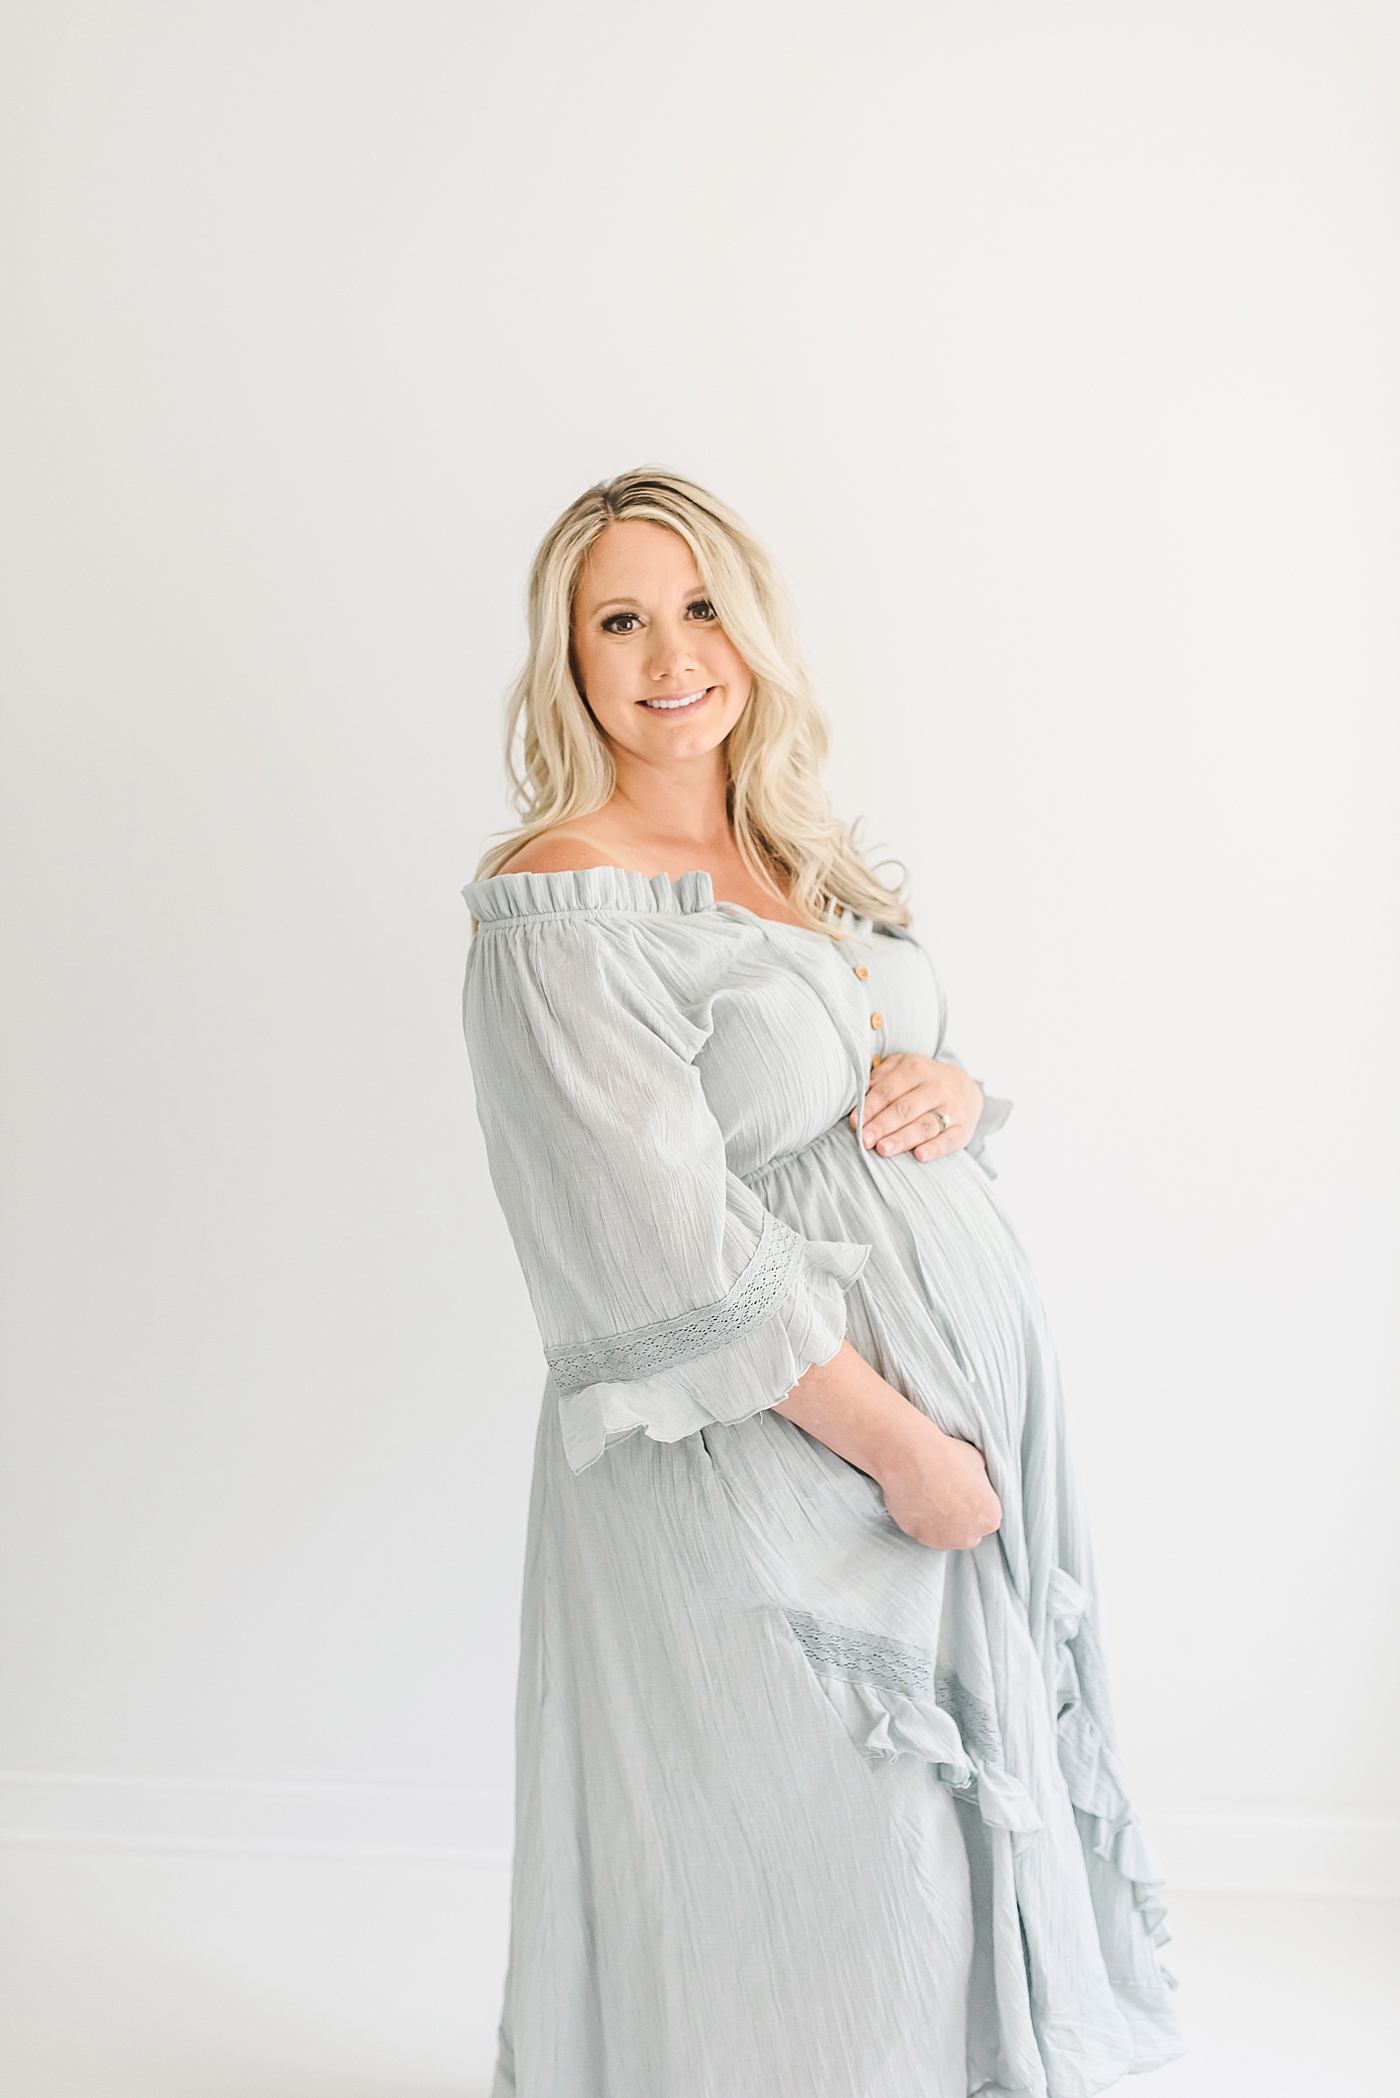 Mother to be in pale blue dress smiling at camera | Photo by Anna Wisjo Photography